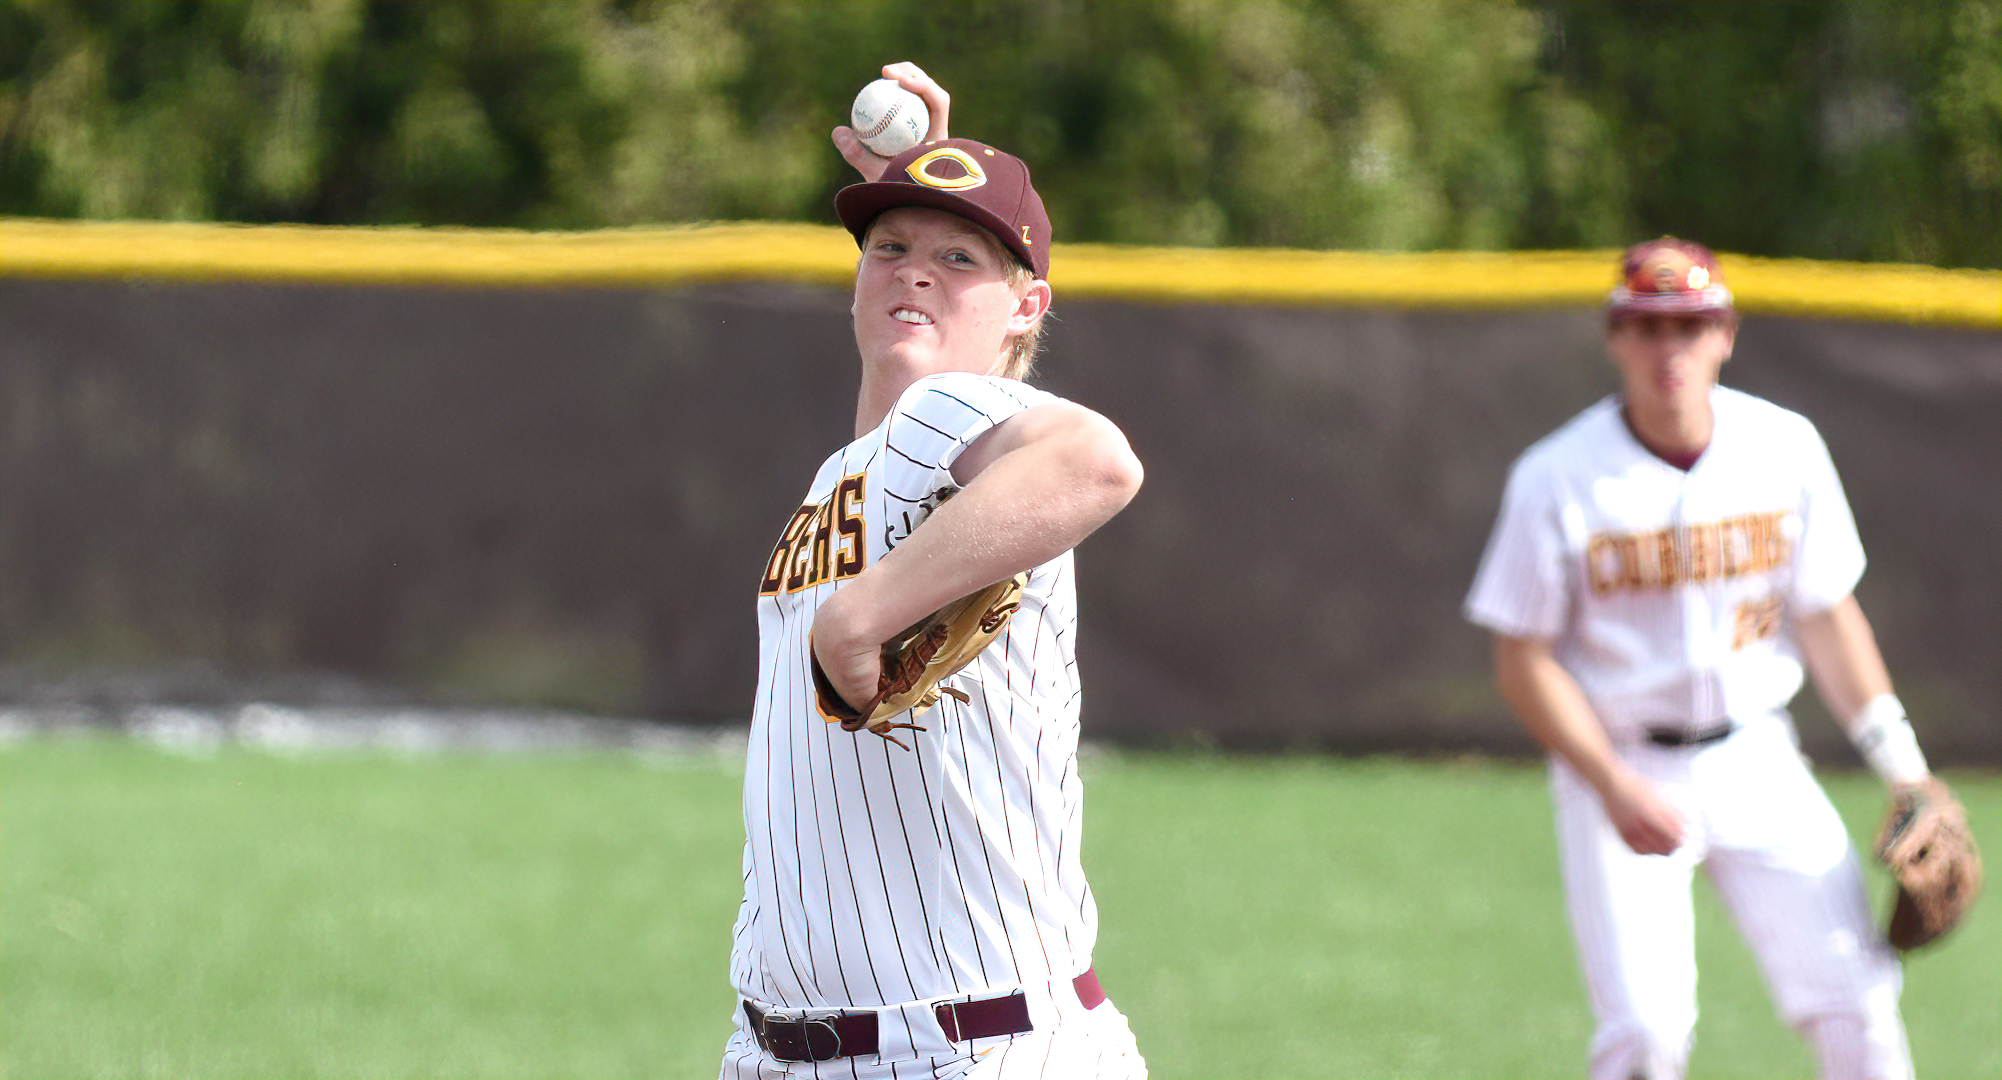 Dylan Erholtz didn't allow a hit and struck out three to pick up the win in the opener of the Cobbers' sweep over Bethany (W.V.)